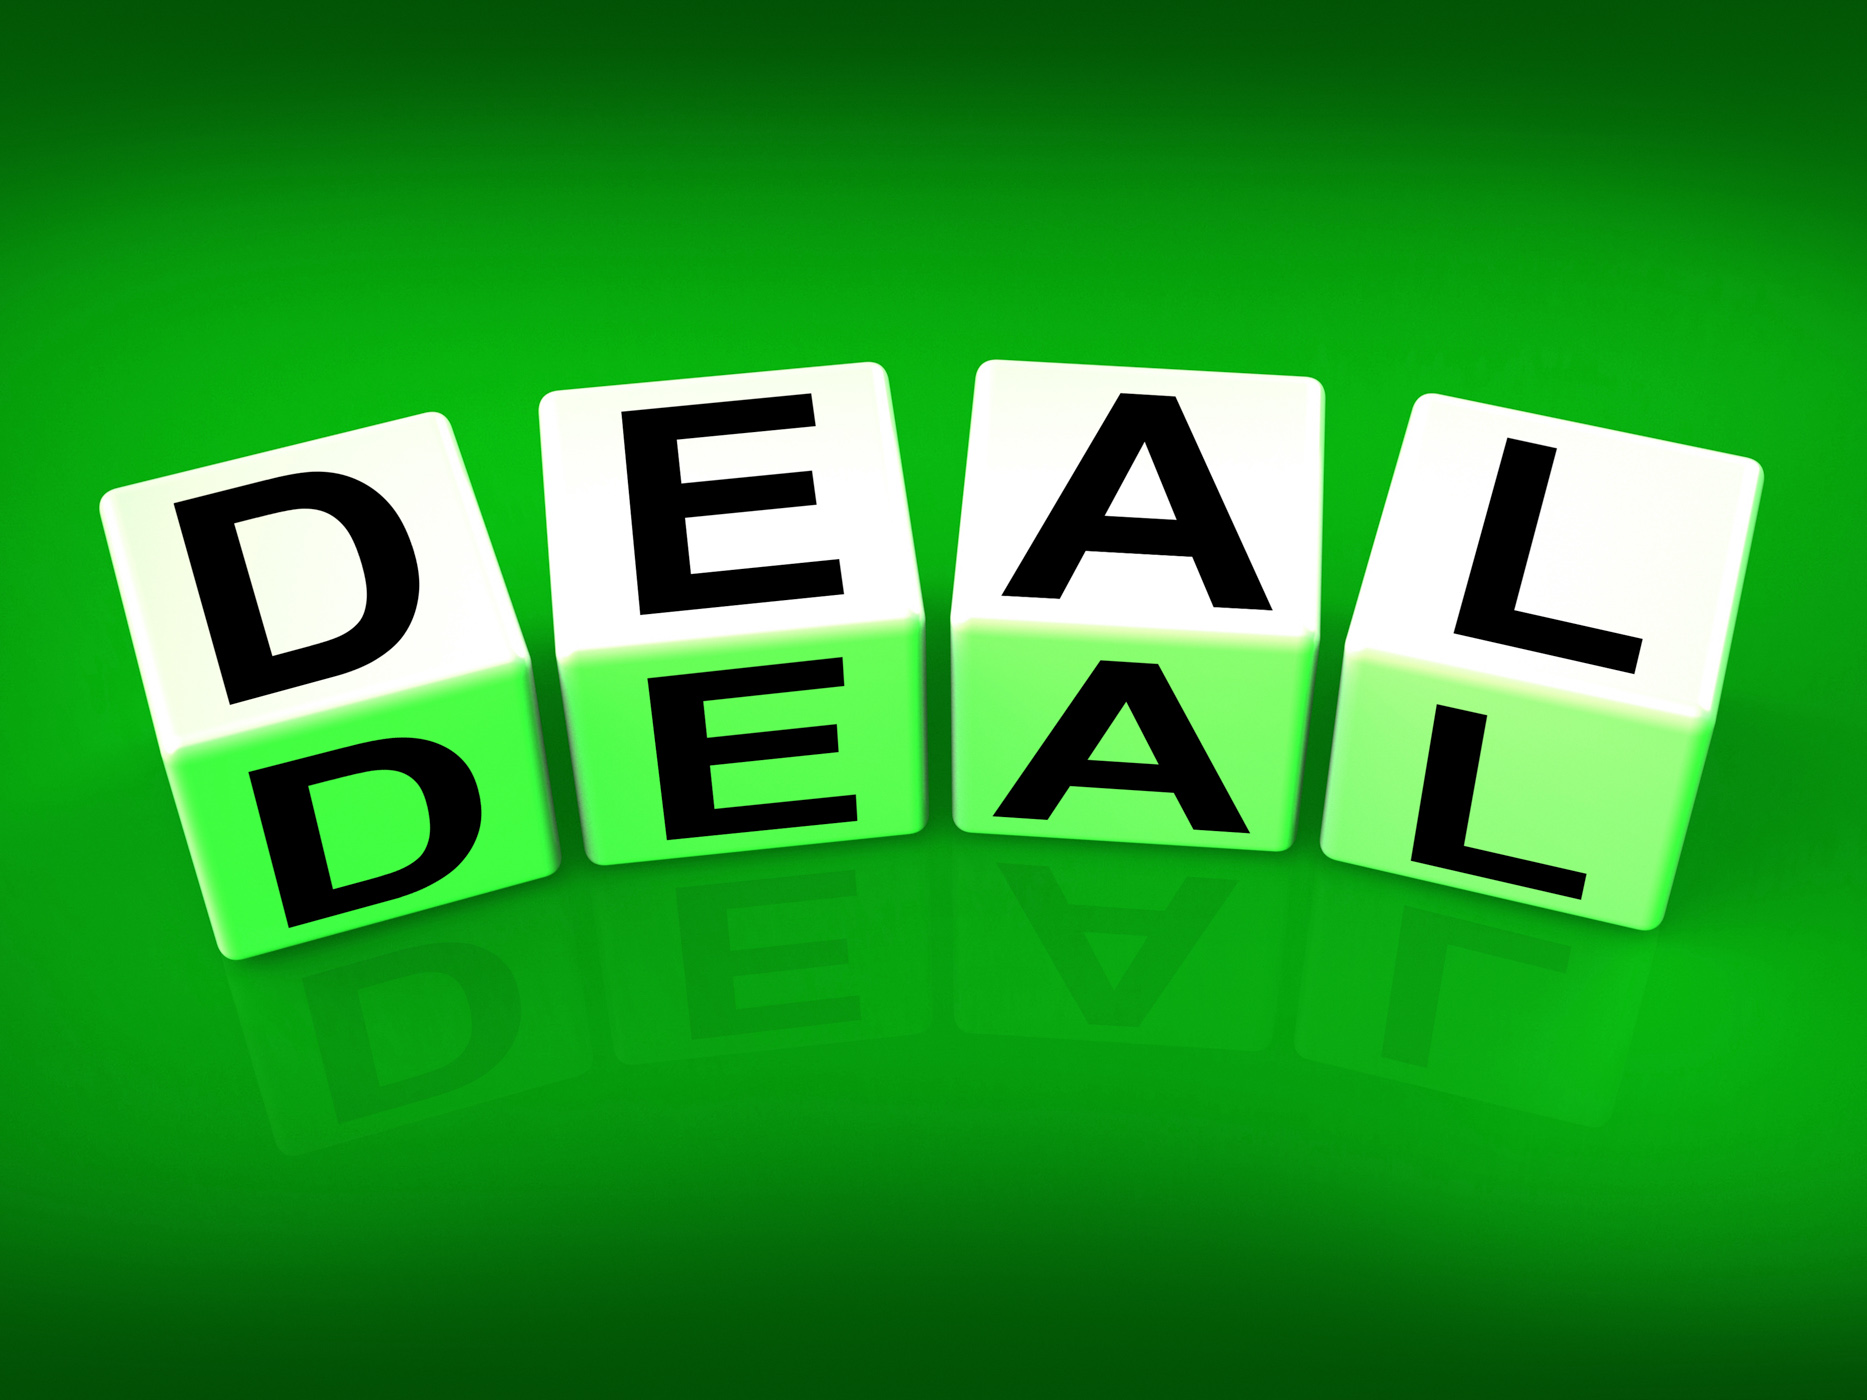 Deal blocks show dealings transactions and agreements photo